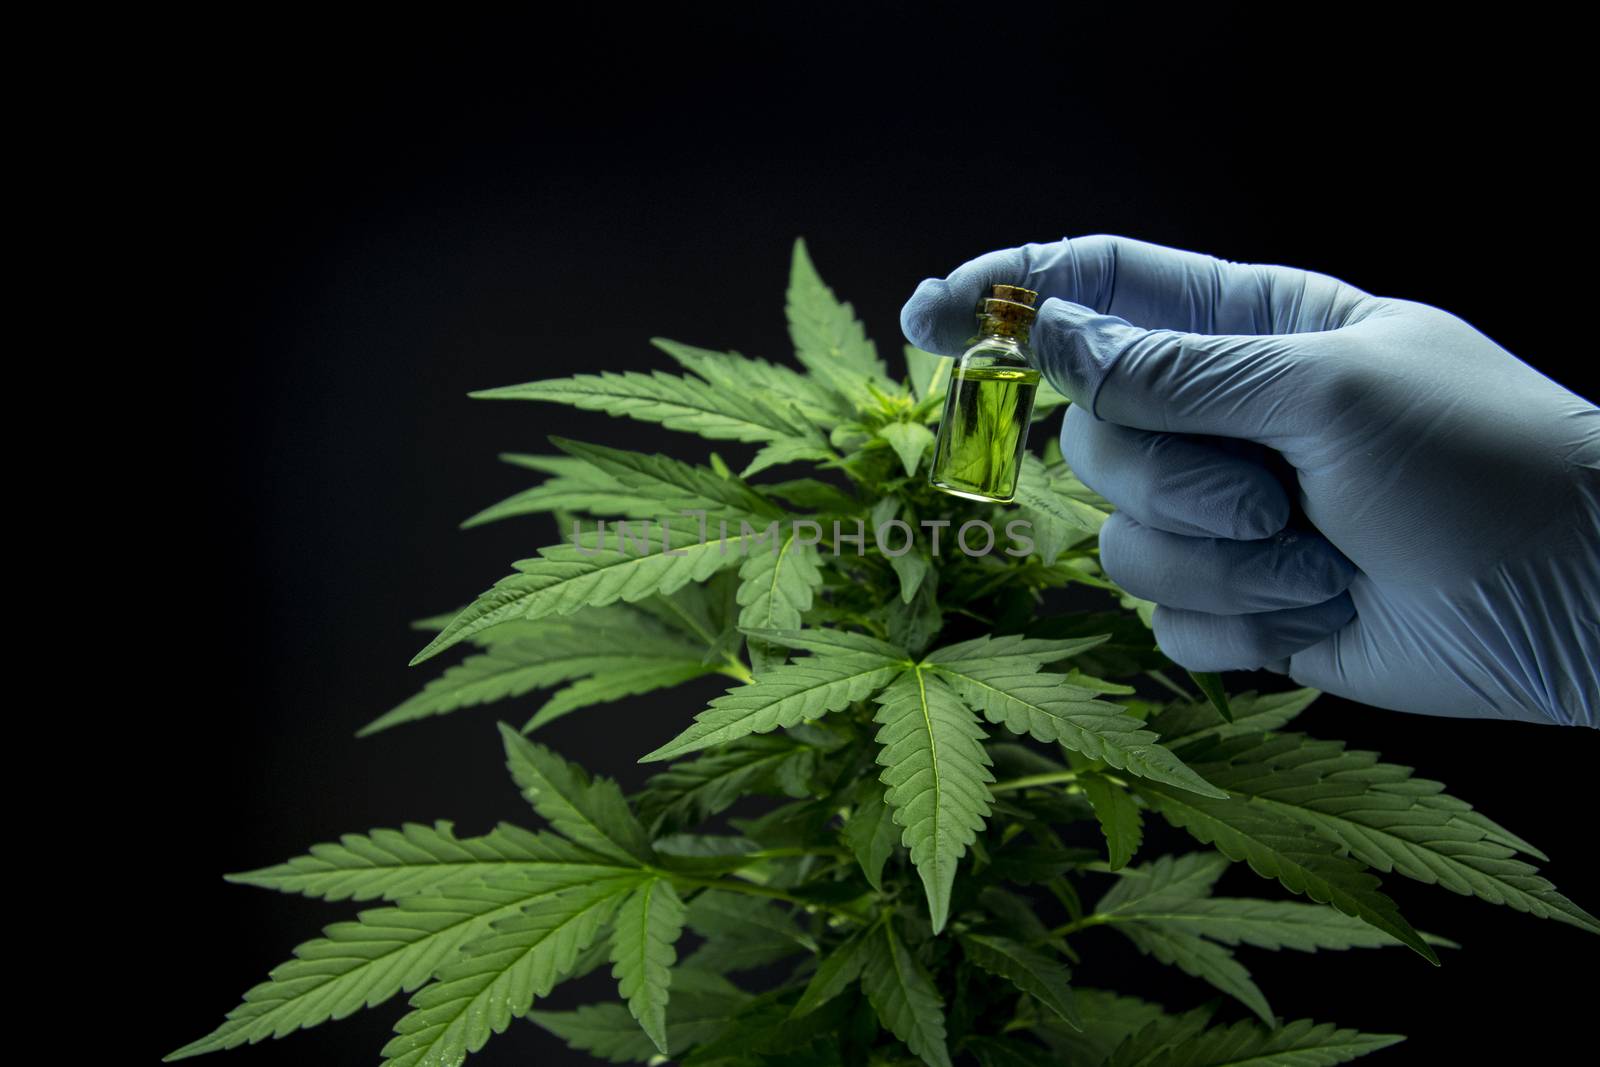 Cannabis leaves of a plant on dark background, CBD extract from hemp leaf, plants weed like marijuana, research for medical benefits, Concept of herbal alternative medicine, THC oil pharmaceutical.